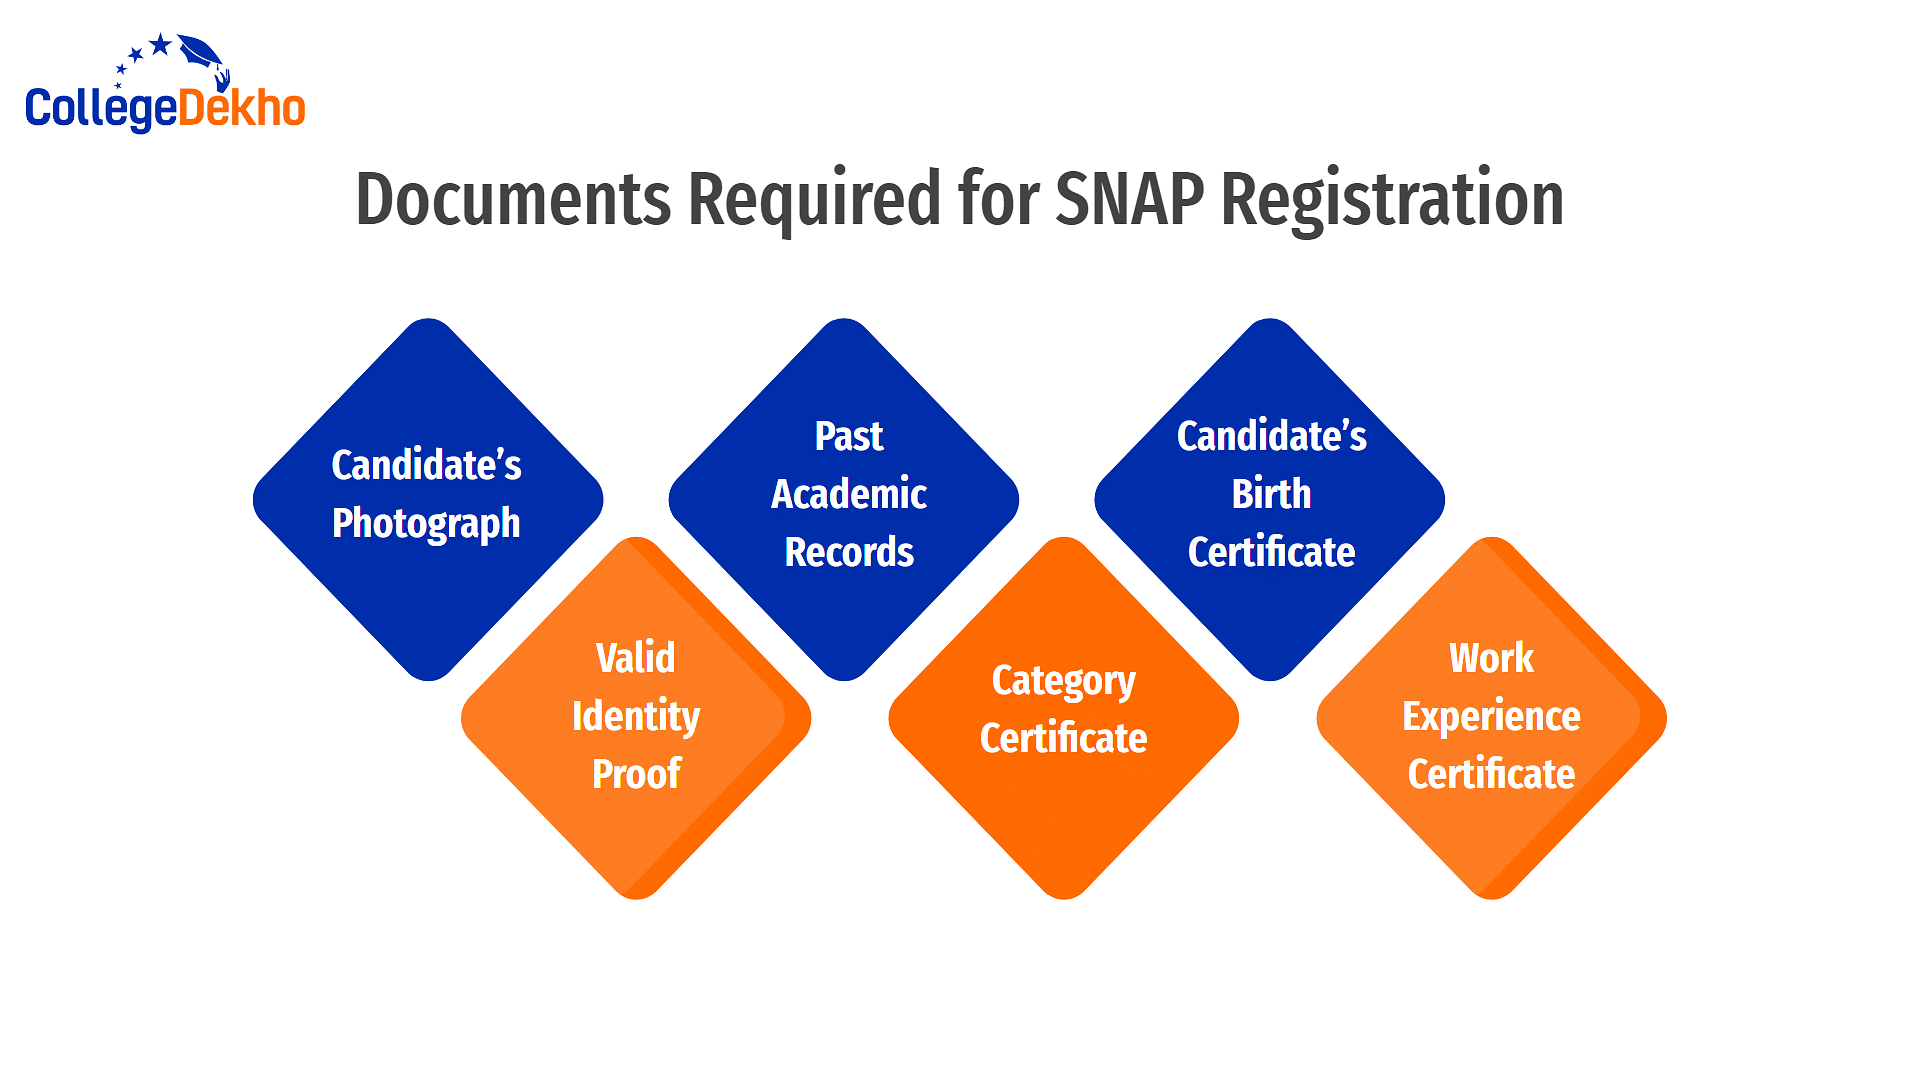 Documents Required for SNAP Registration